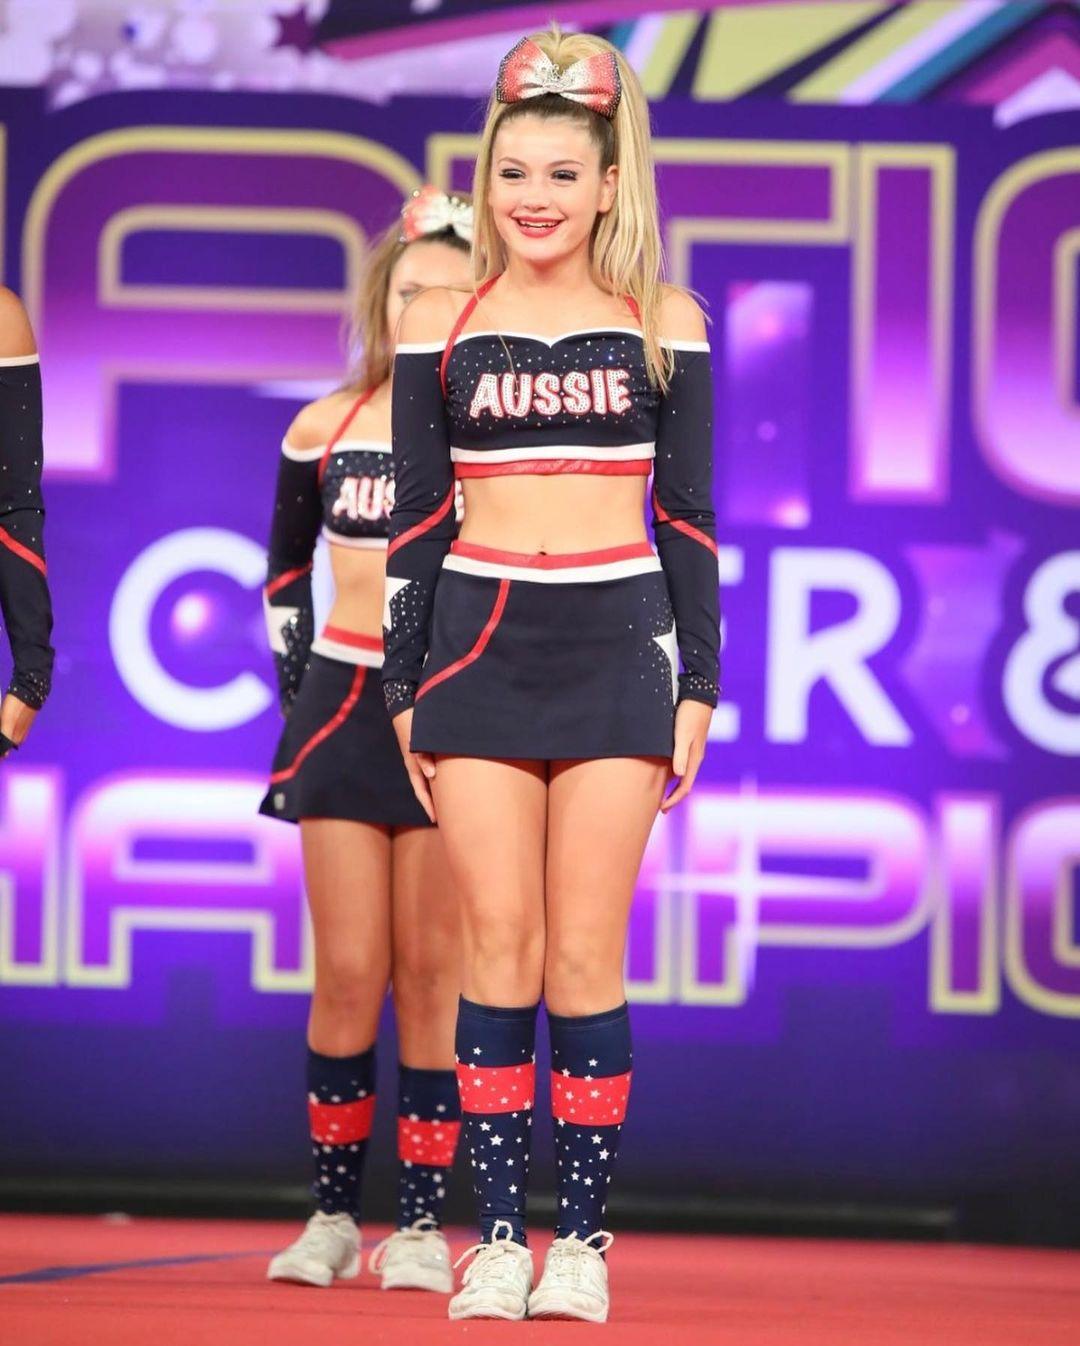 class="content__text"
 Professional comp photos are in 💜

 #nationals #aascf #sellit #cheerleading #cheer #aussiecheer #aussiecheeranddance #cheerhair #competition #cheerteam #uni #bow #dance #cheerleadingcompetition #cheerleadingisasport #cheerleadingbows #cheerleadinggoals #pinnacle #2ndplace #number2 #trophy #runnersup 
 